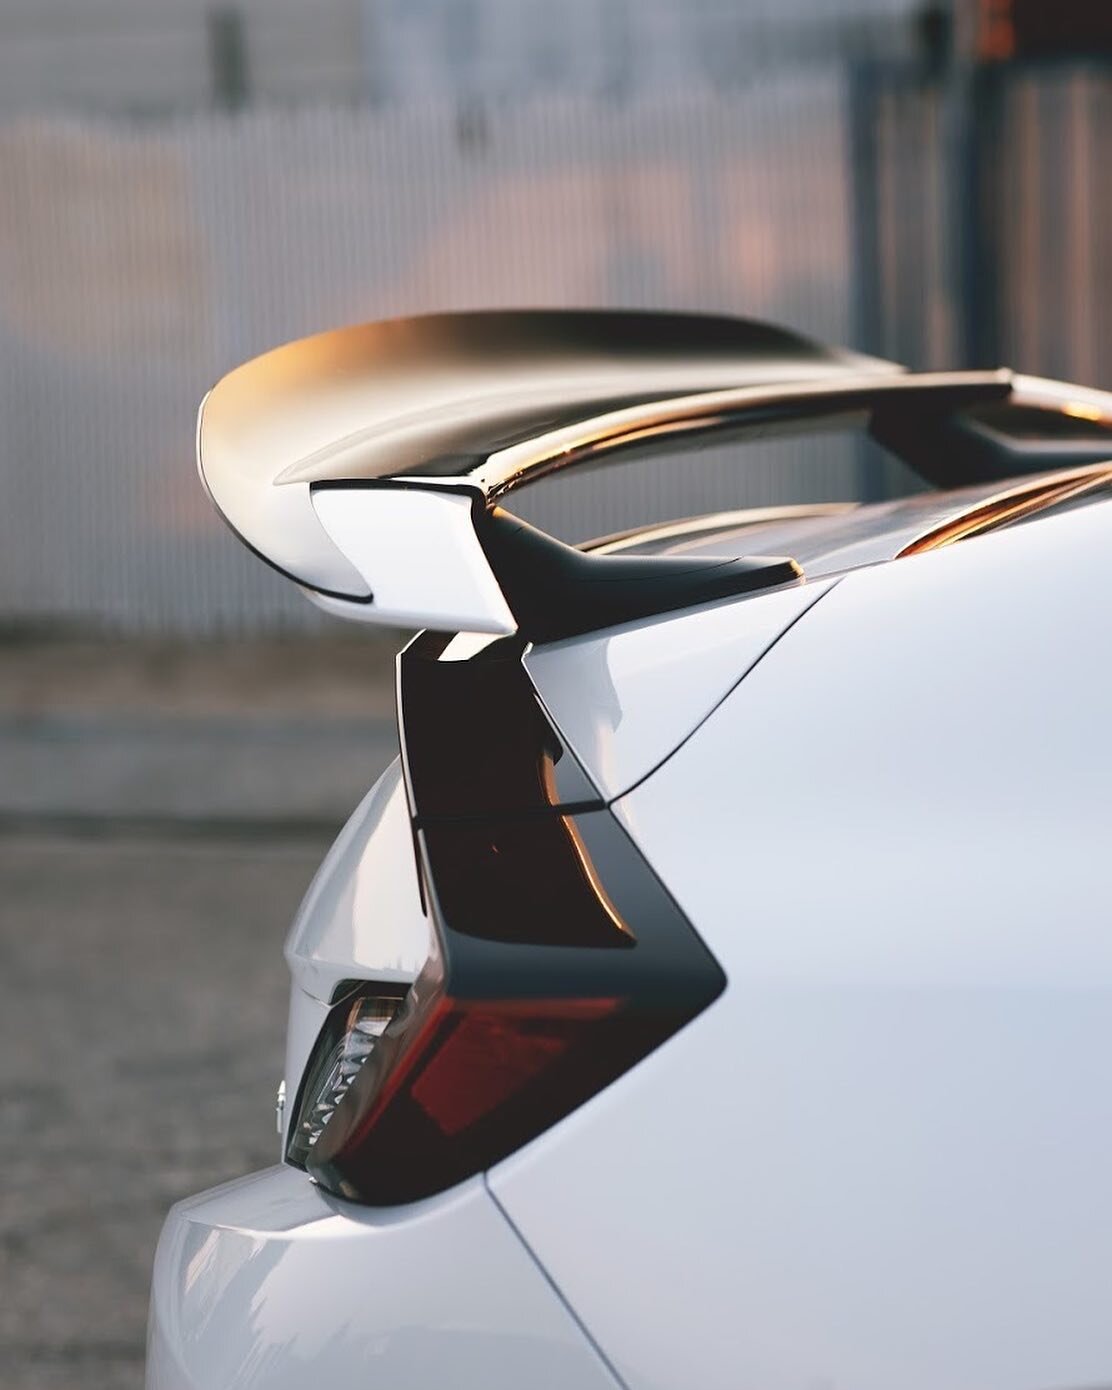 10th Gen Civic SI Coupe Aero Flap
______________________________⠀
The Aero Flap is designed to wrap around the factory OE wing. Under downforce pressure, the unique design will create an airlock function to secure the flap.⠀
PATENT PENDING US 16/658,